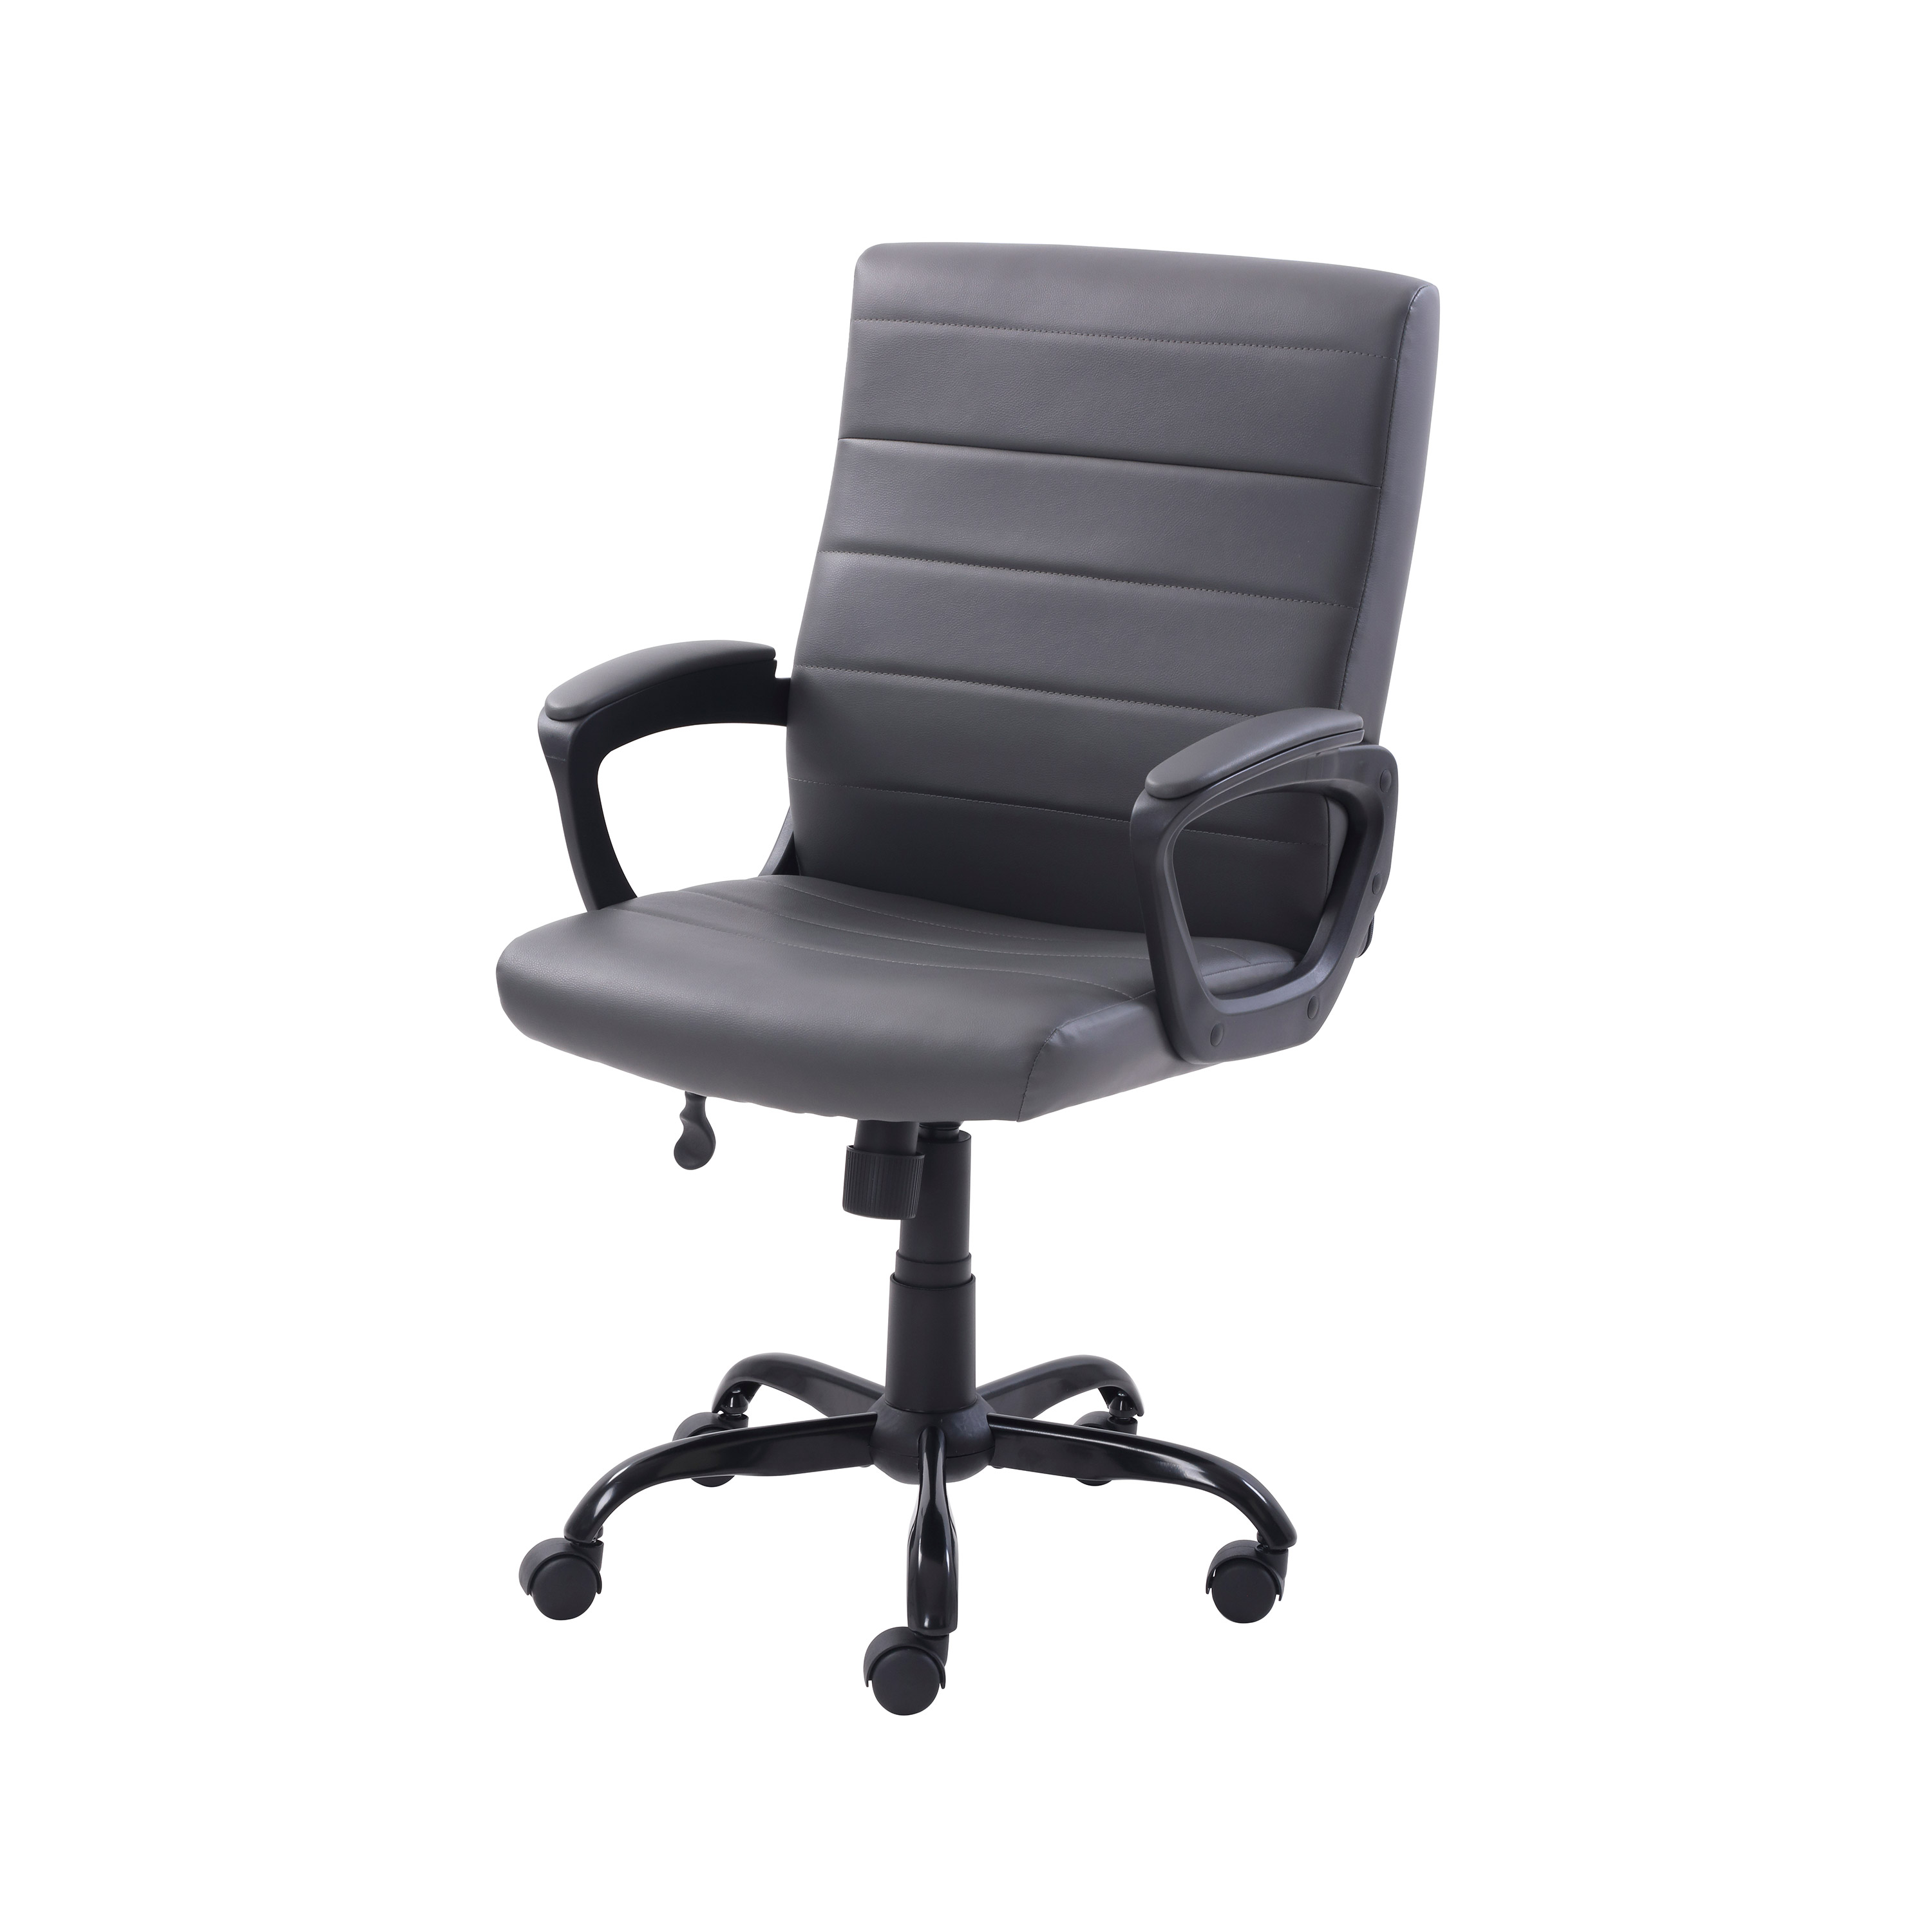 Mainstays Bonded Leather Mid-Back Manager's Office Chair, Gray - image 1 of 11